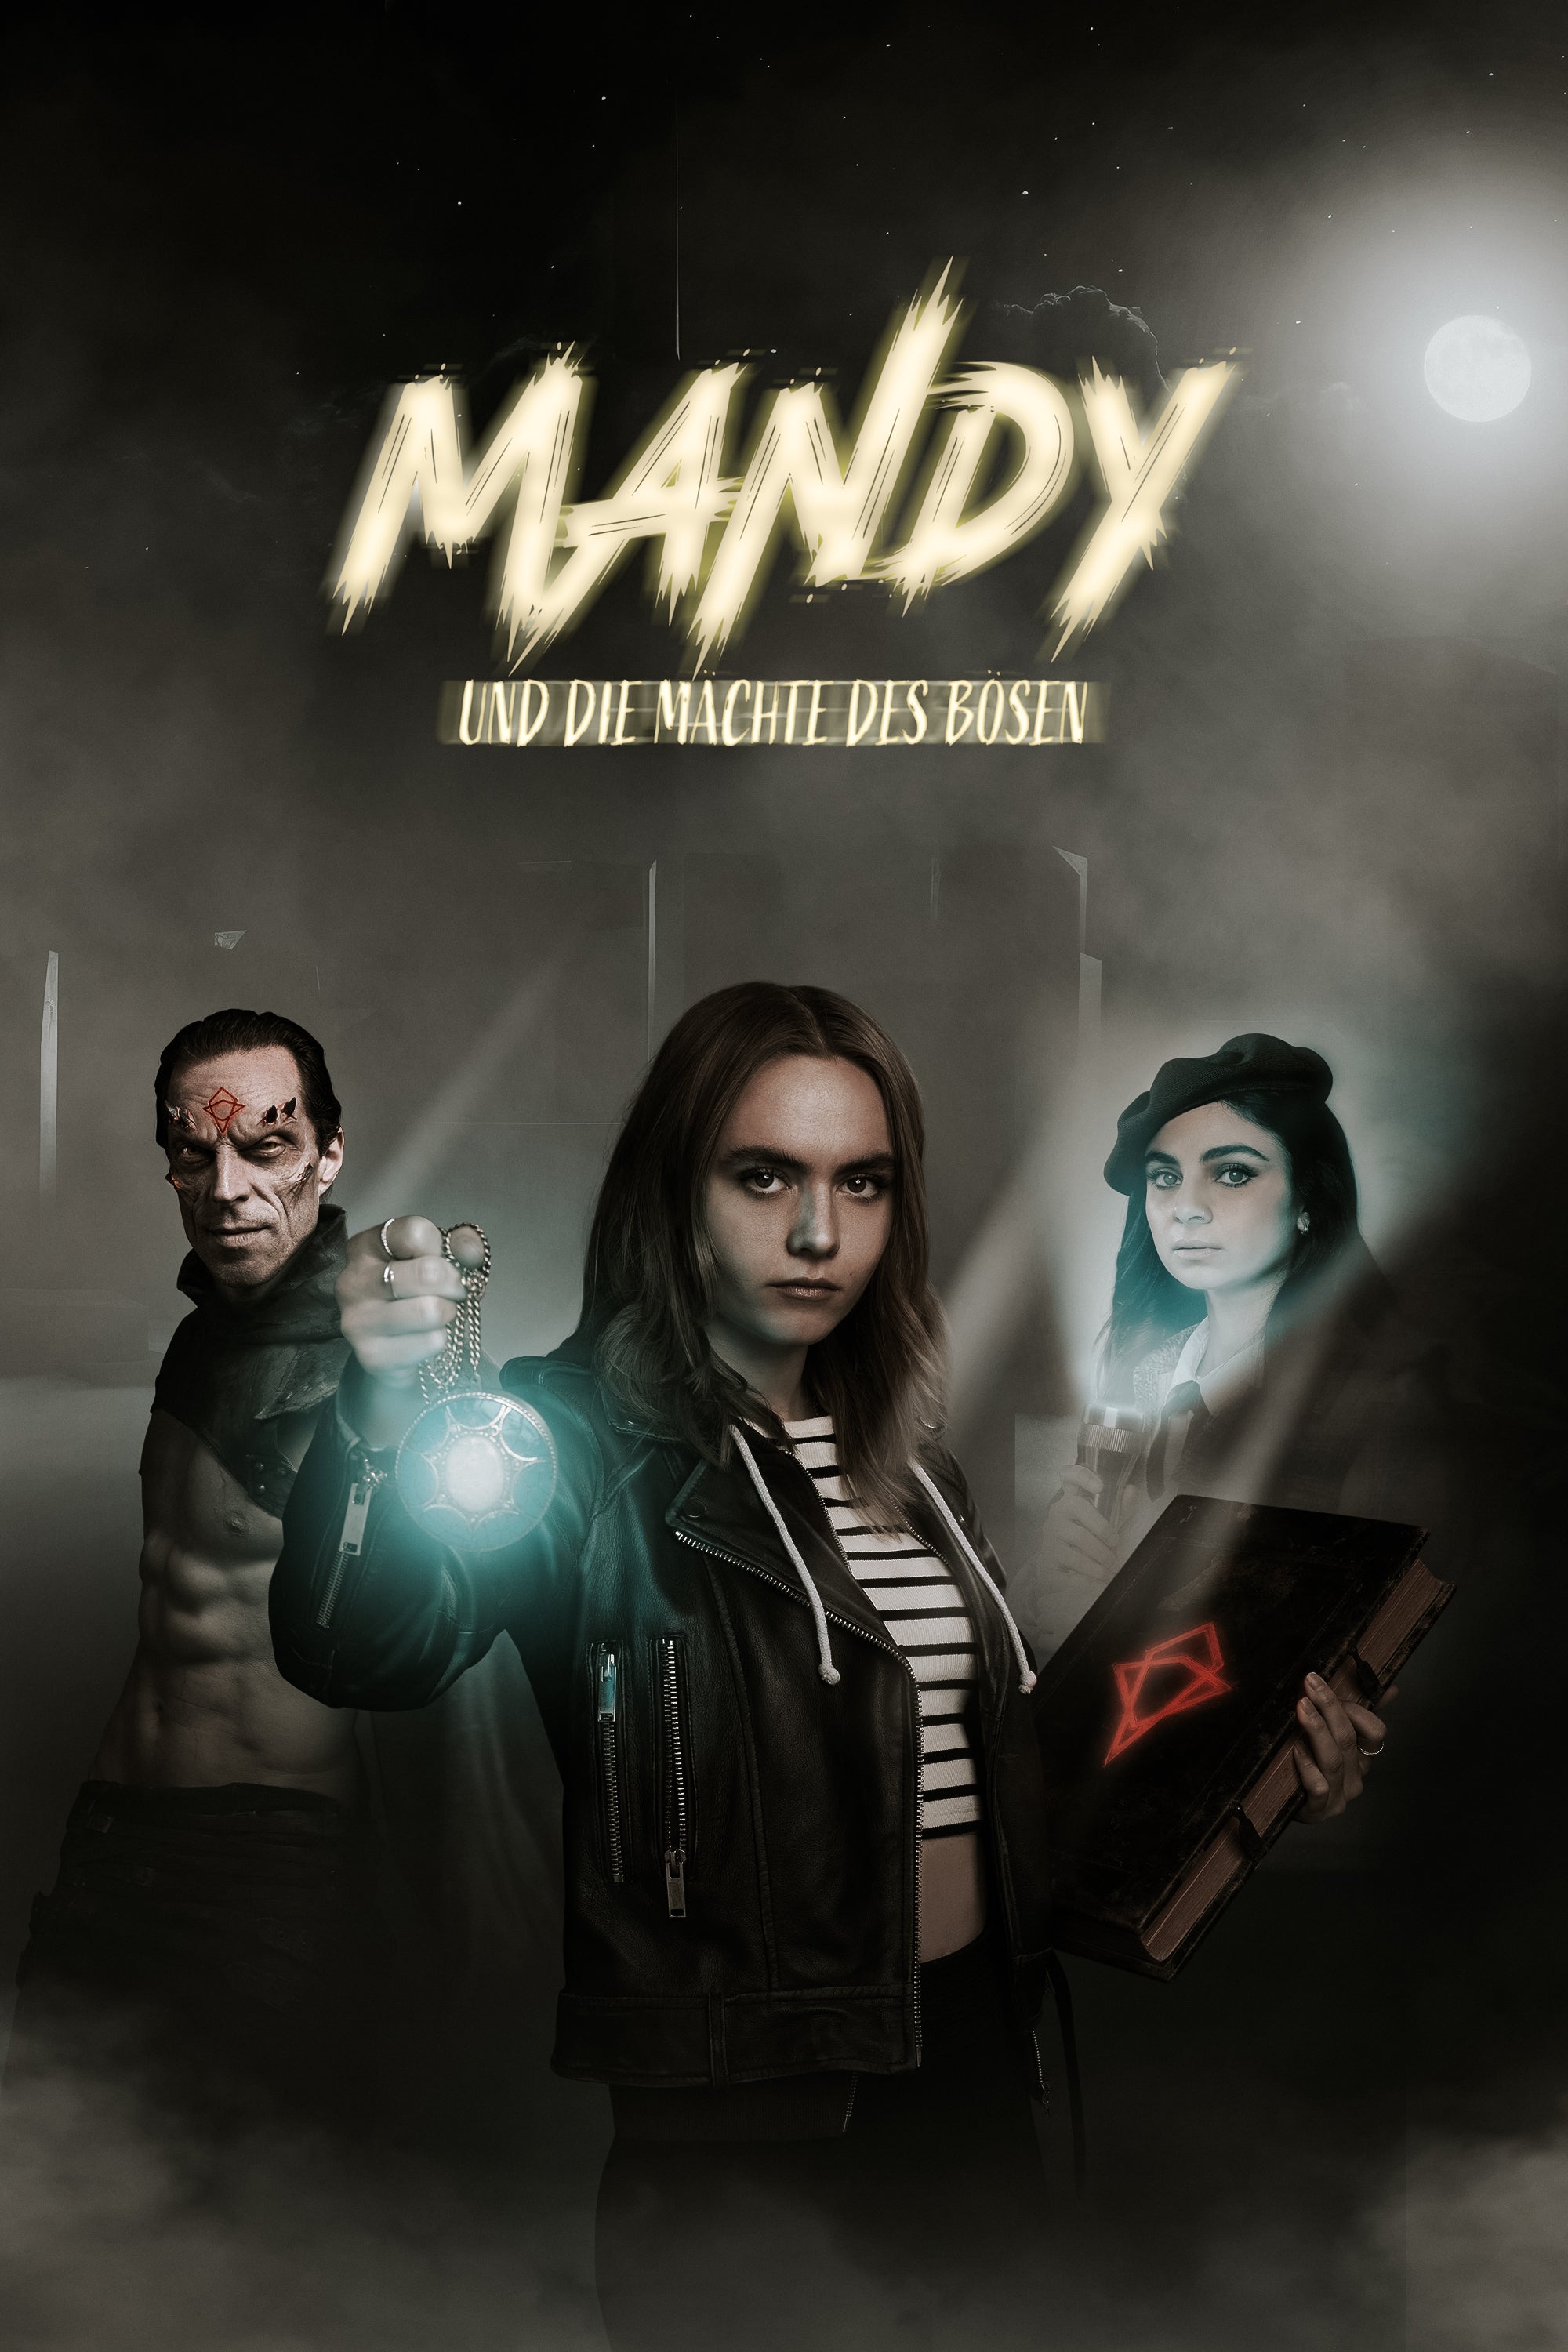 TV ratings for Mandy And The Forces Of Evil (Mandy Und Die Mächte Des Bösen) in the United States. Amazon Prime Video TV series